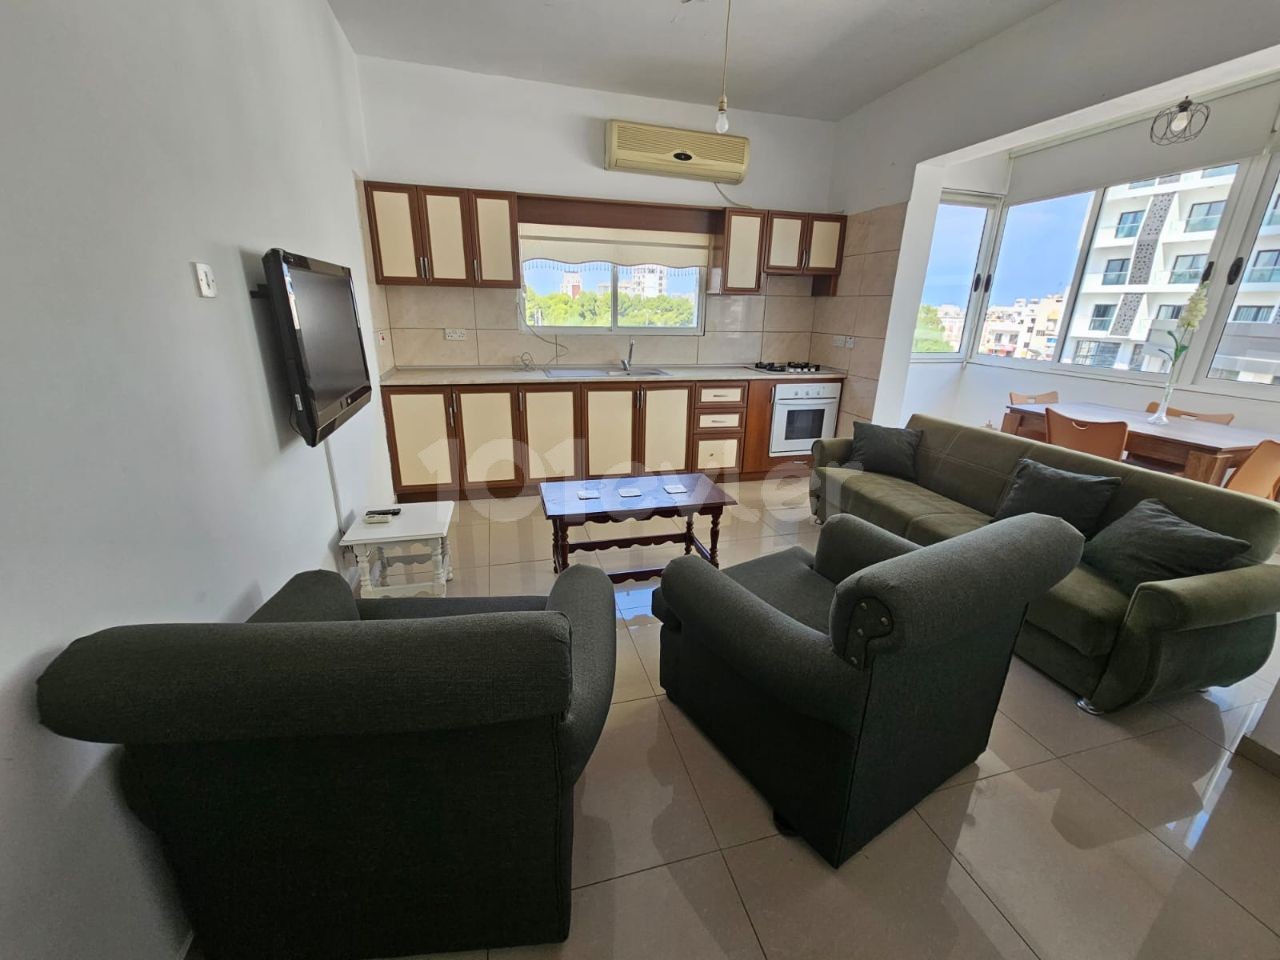 2+1 flat for rent in Eastern Mediterranean University 10 months payment 5000 dollars rent deposit 500 dollars commission 500 dollars water 11 months 1500 TL electricity card system on the top floor 3rd floor no elevator